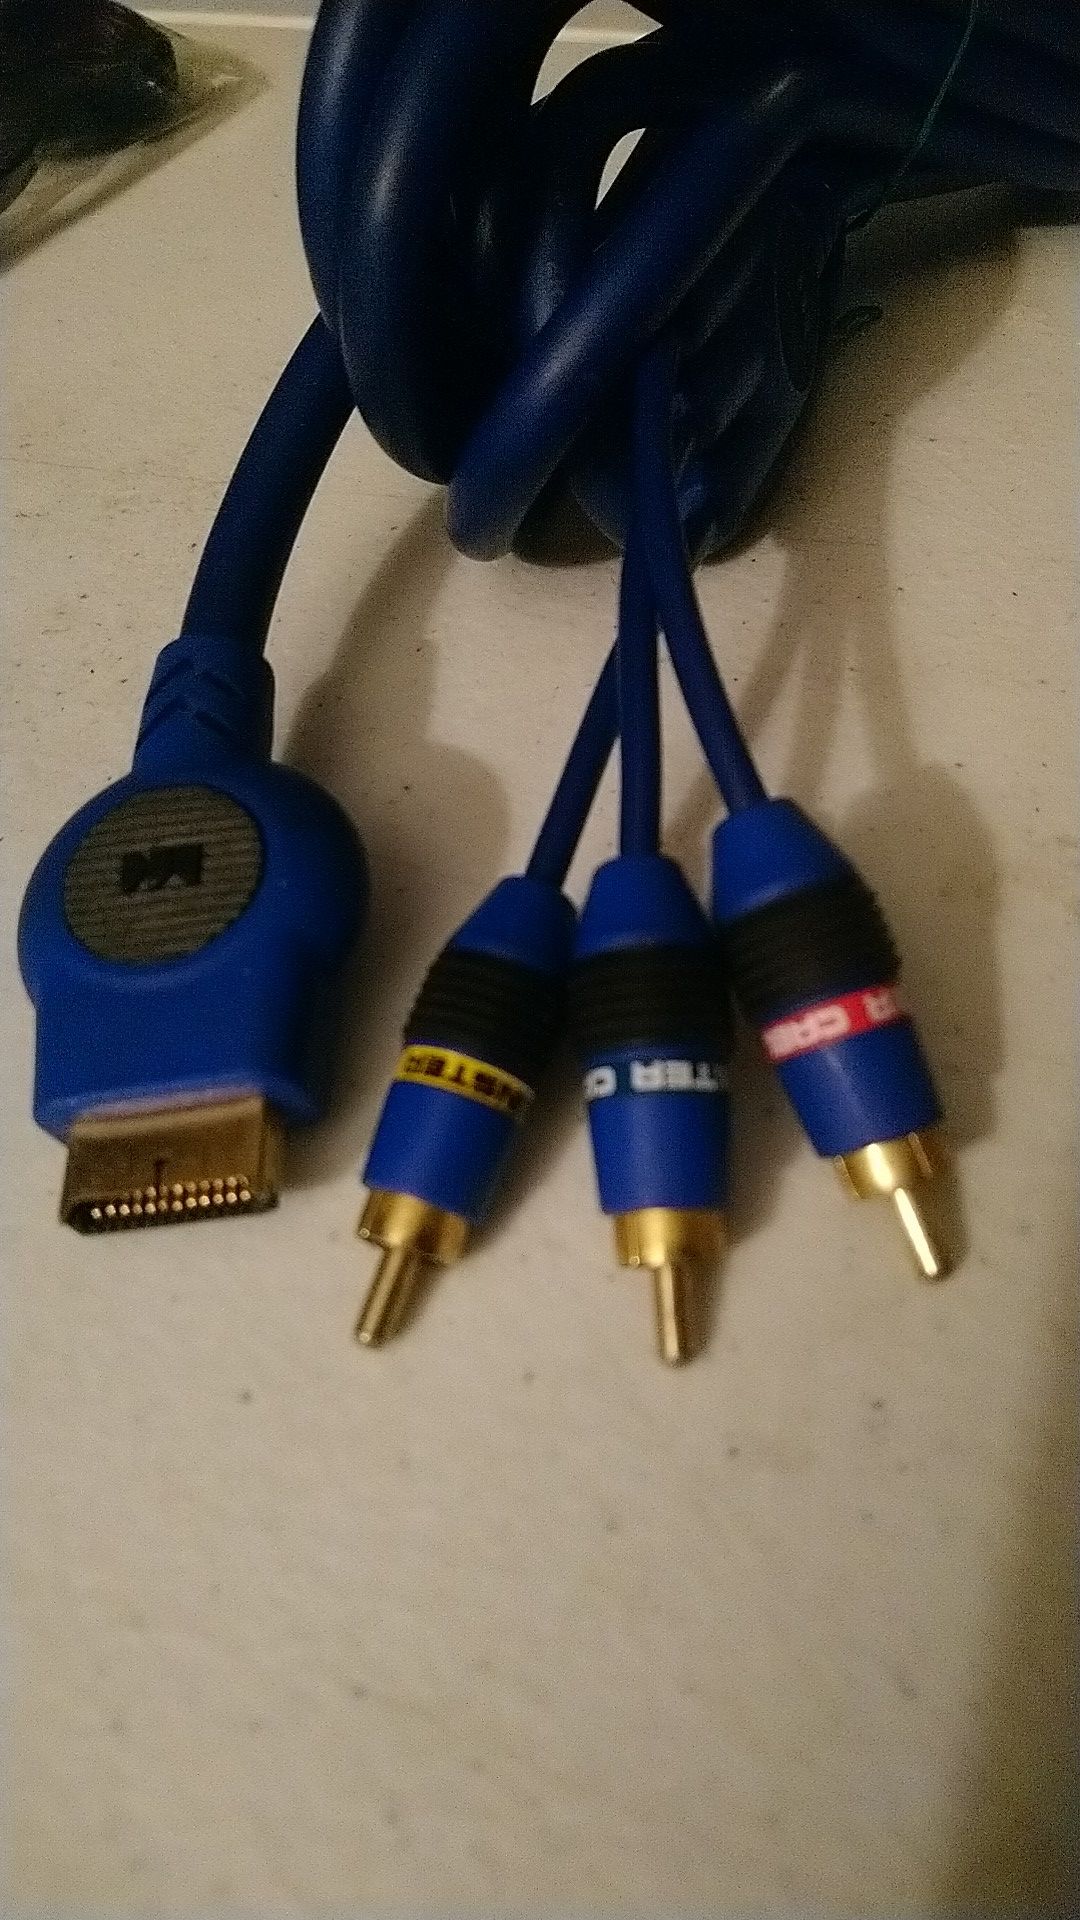 AV cable Ps2/Ps3/9ft.